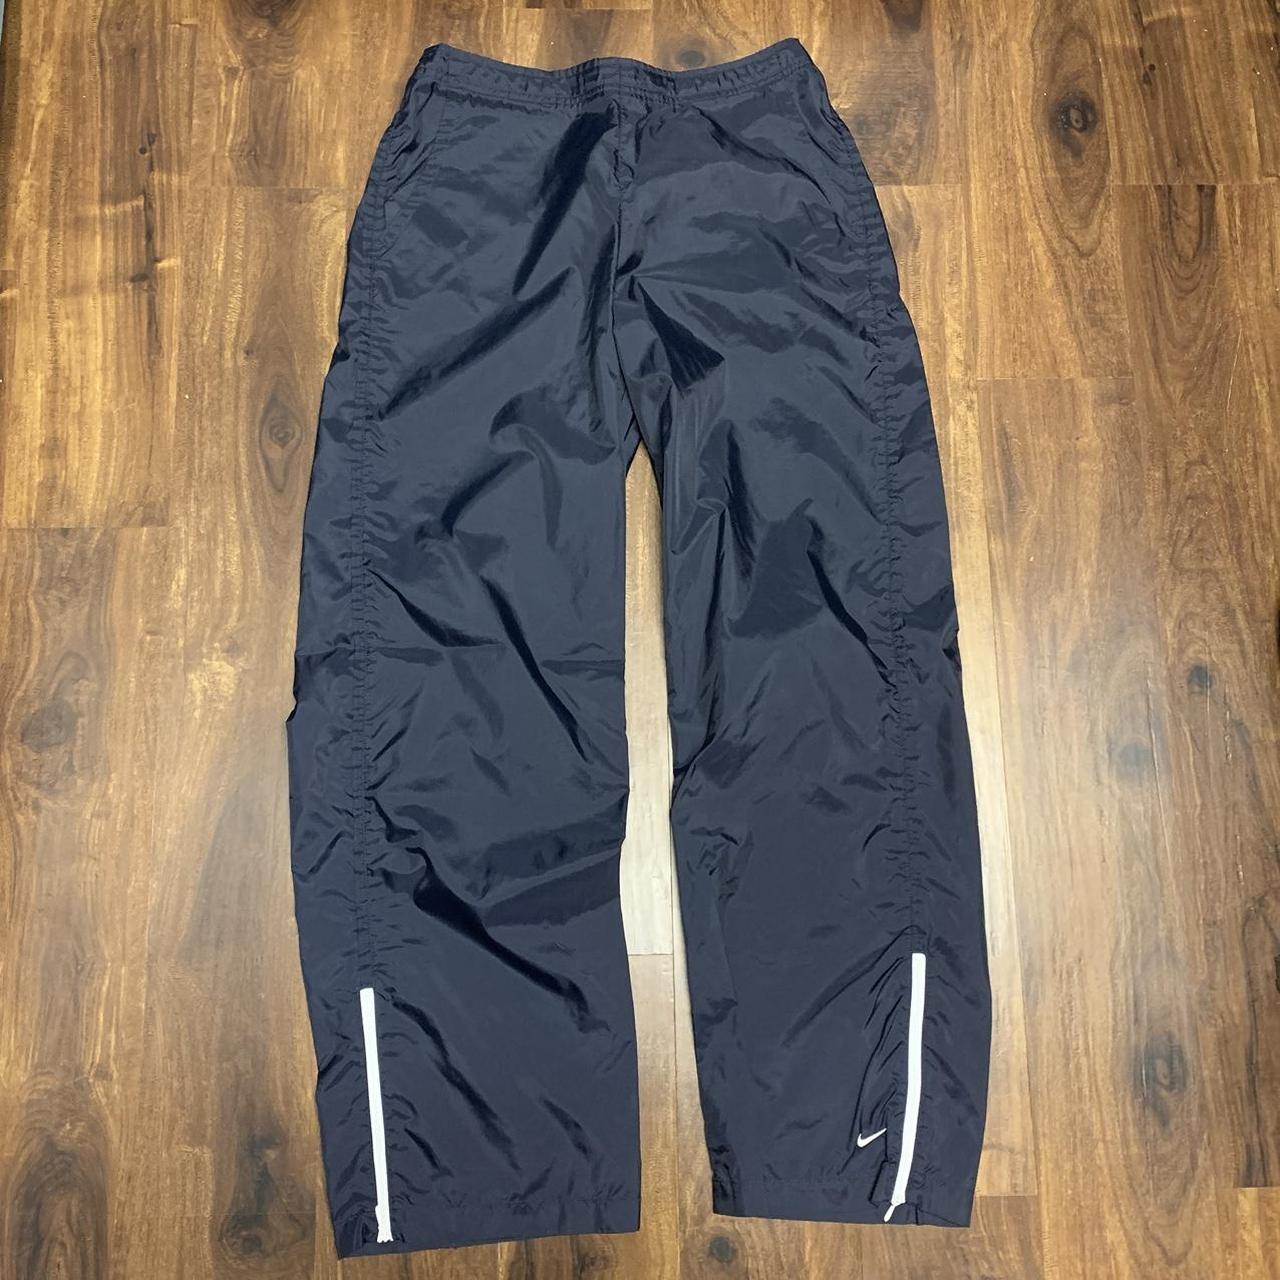 Nike Men's Navy and White Joggers-tracksuits (2)